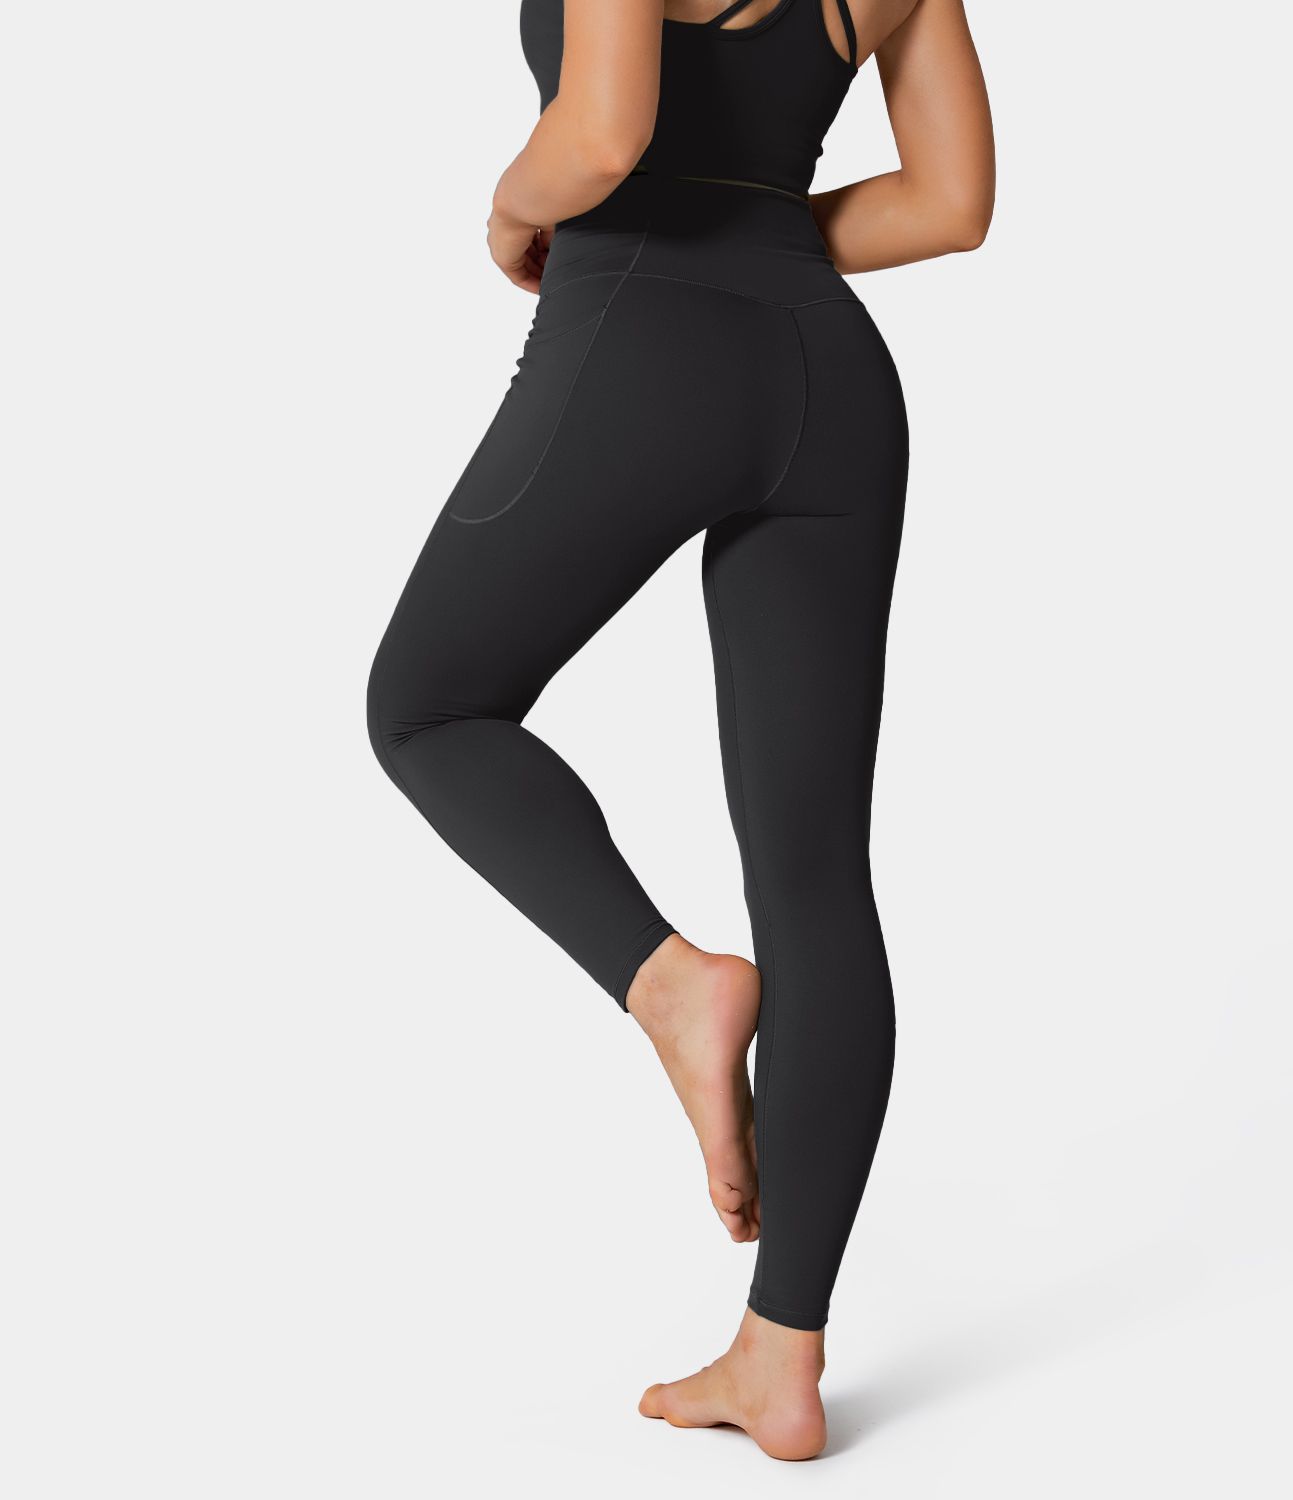 Halara - Brighten up your day with our High Rise Seamless Leggings